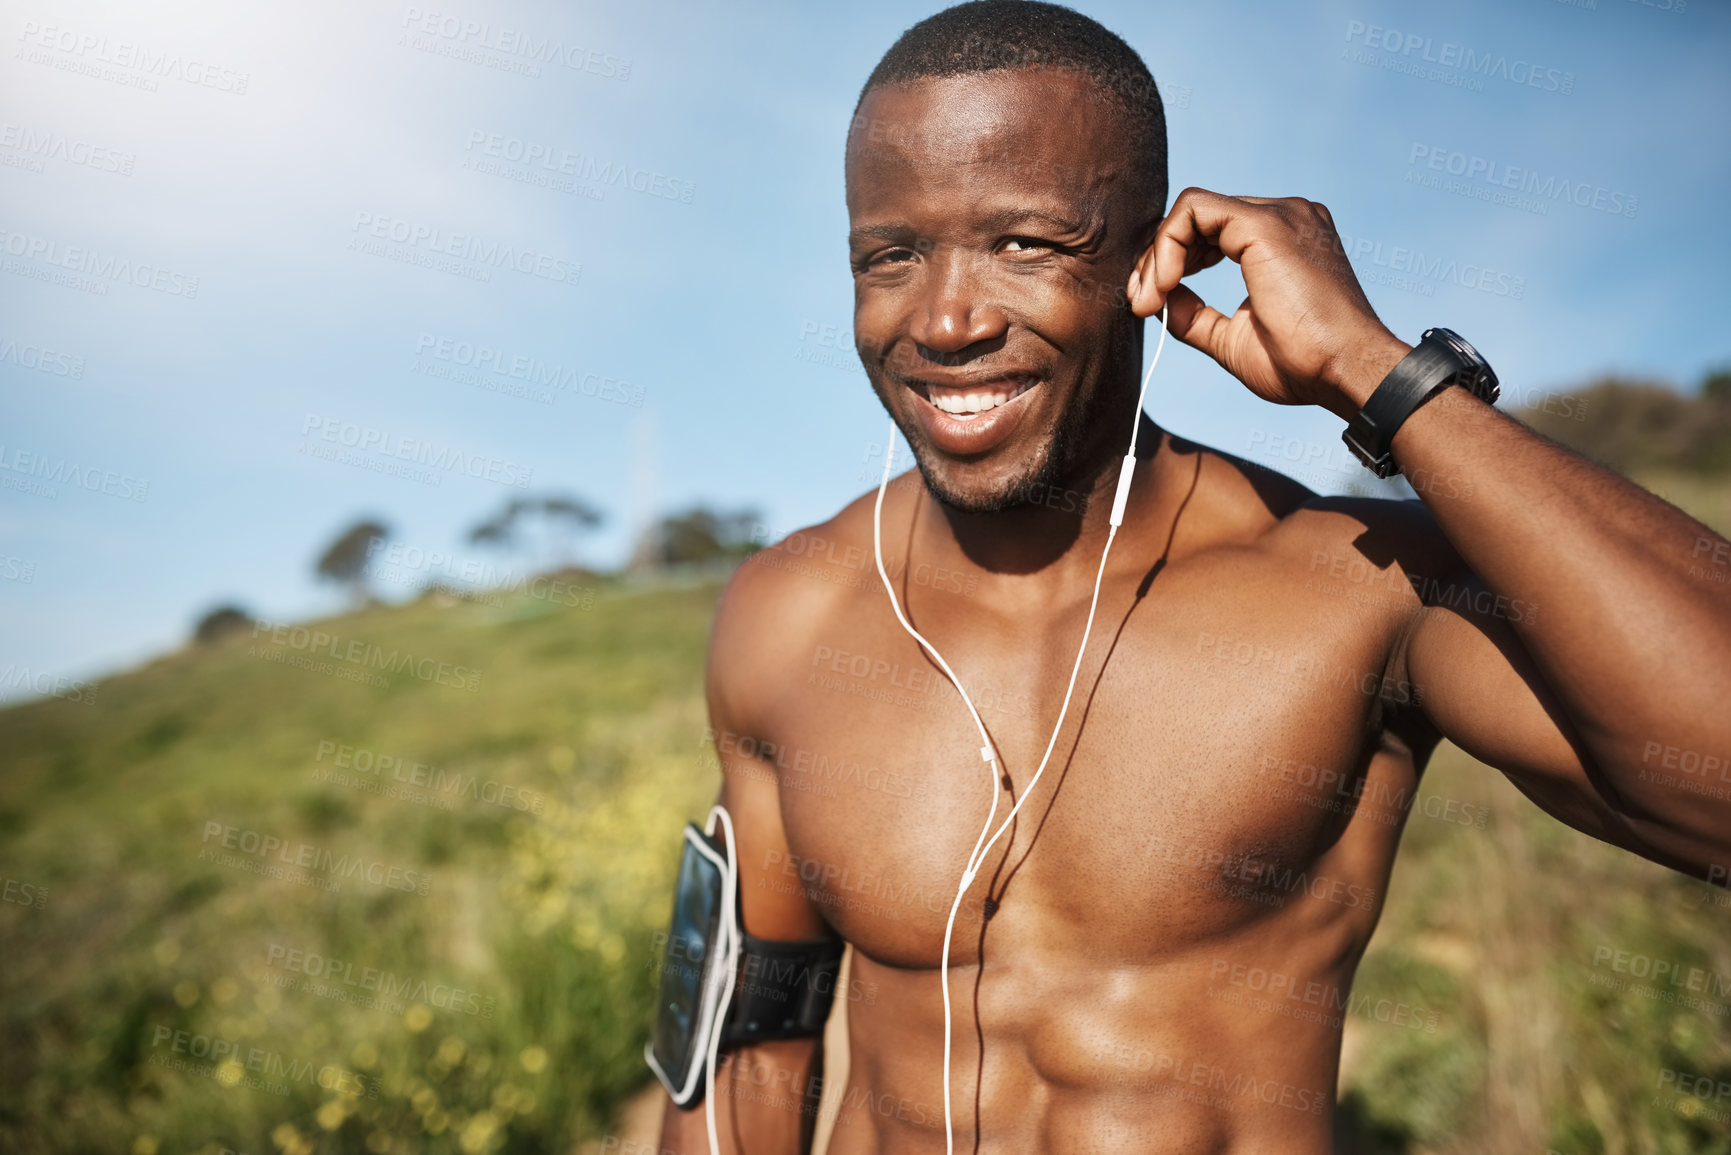 Buy stock photo Cropped shot of a man listening to music while out for a run